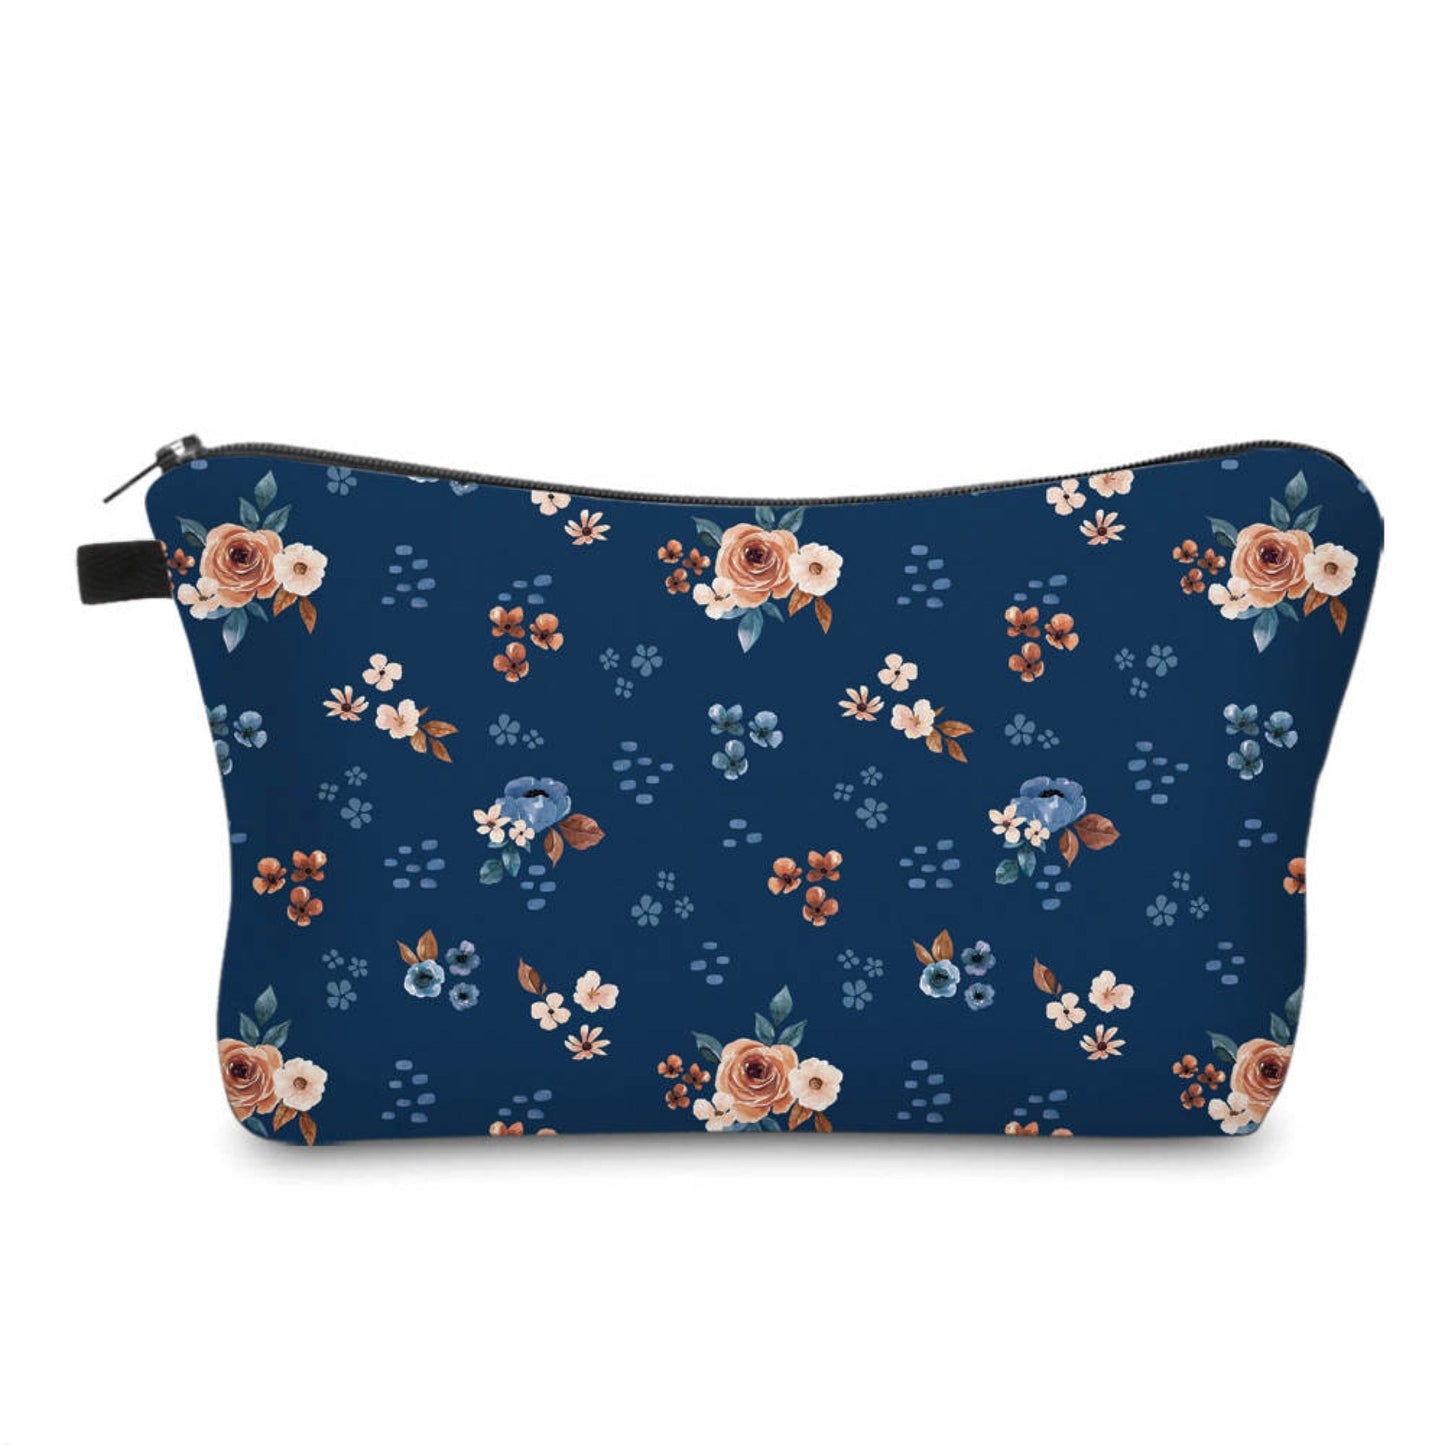 Pouch - Floral Bronze & Navy